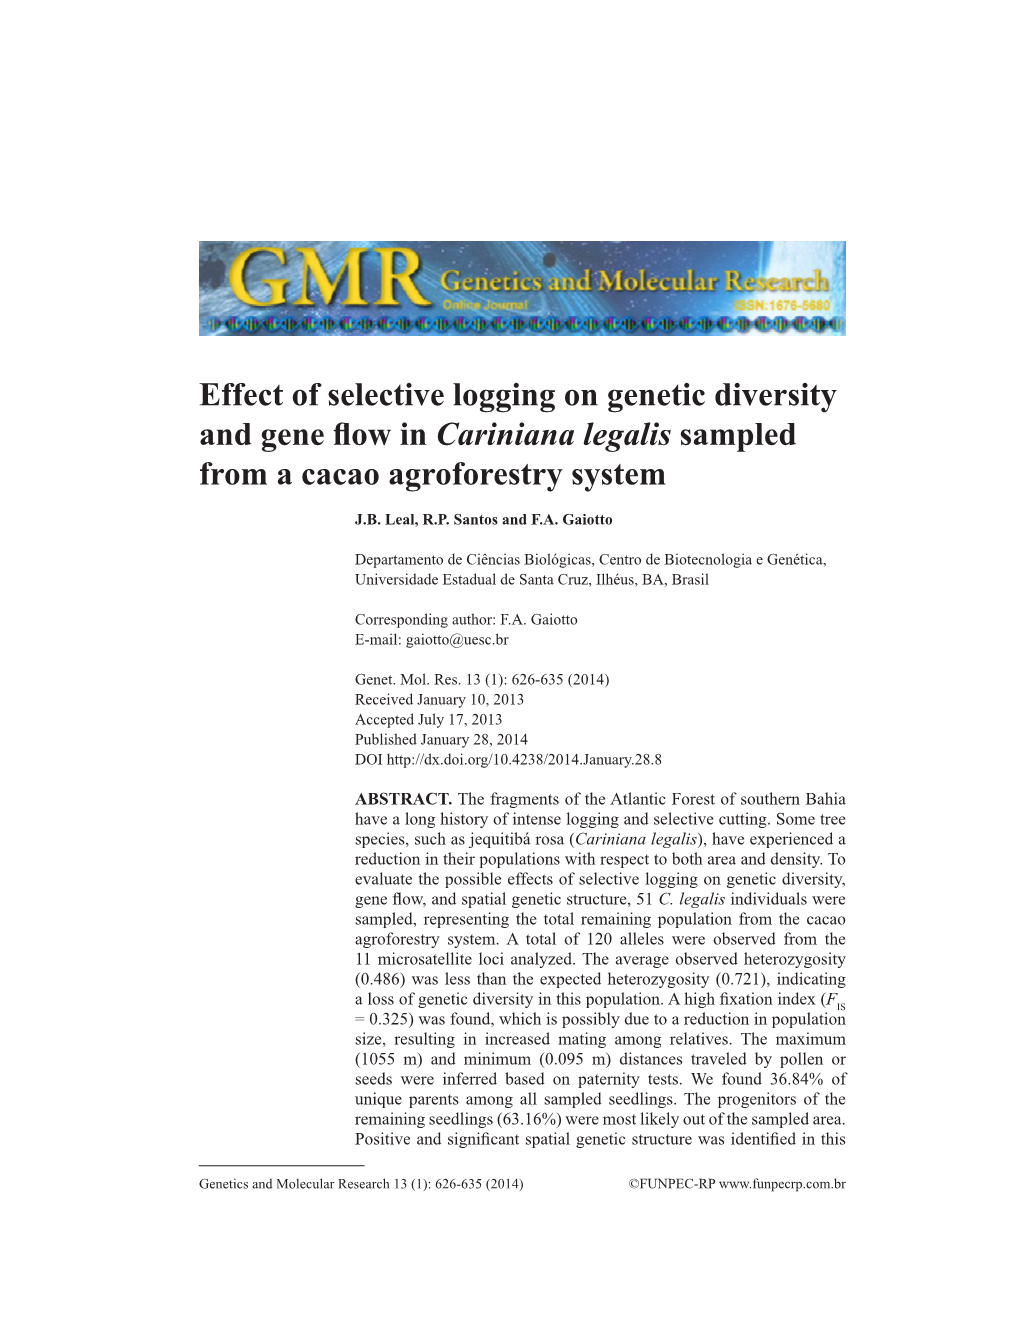 Effect of Selective Logging on Genetic Diversity and Gene Flow in Cariniana Legalis Sampled from a Cacao Agroforestry System